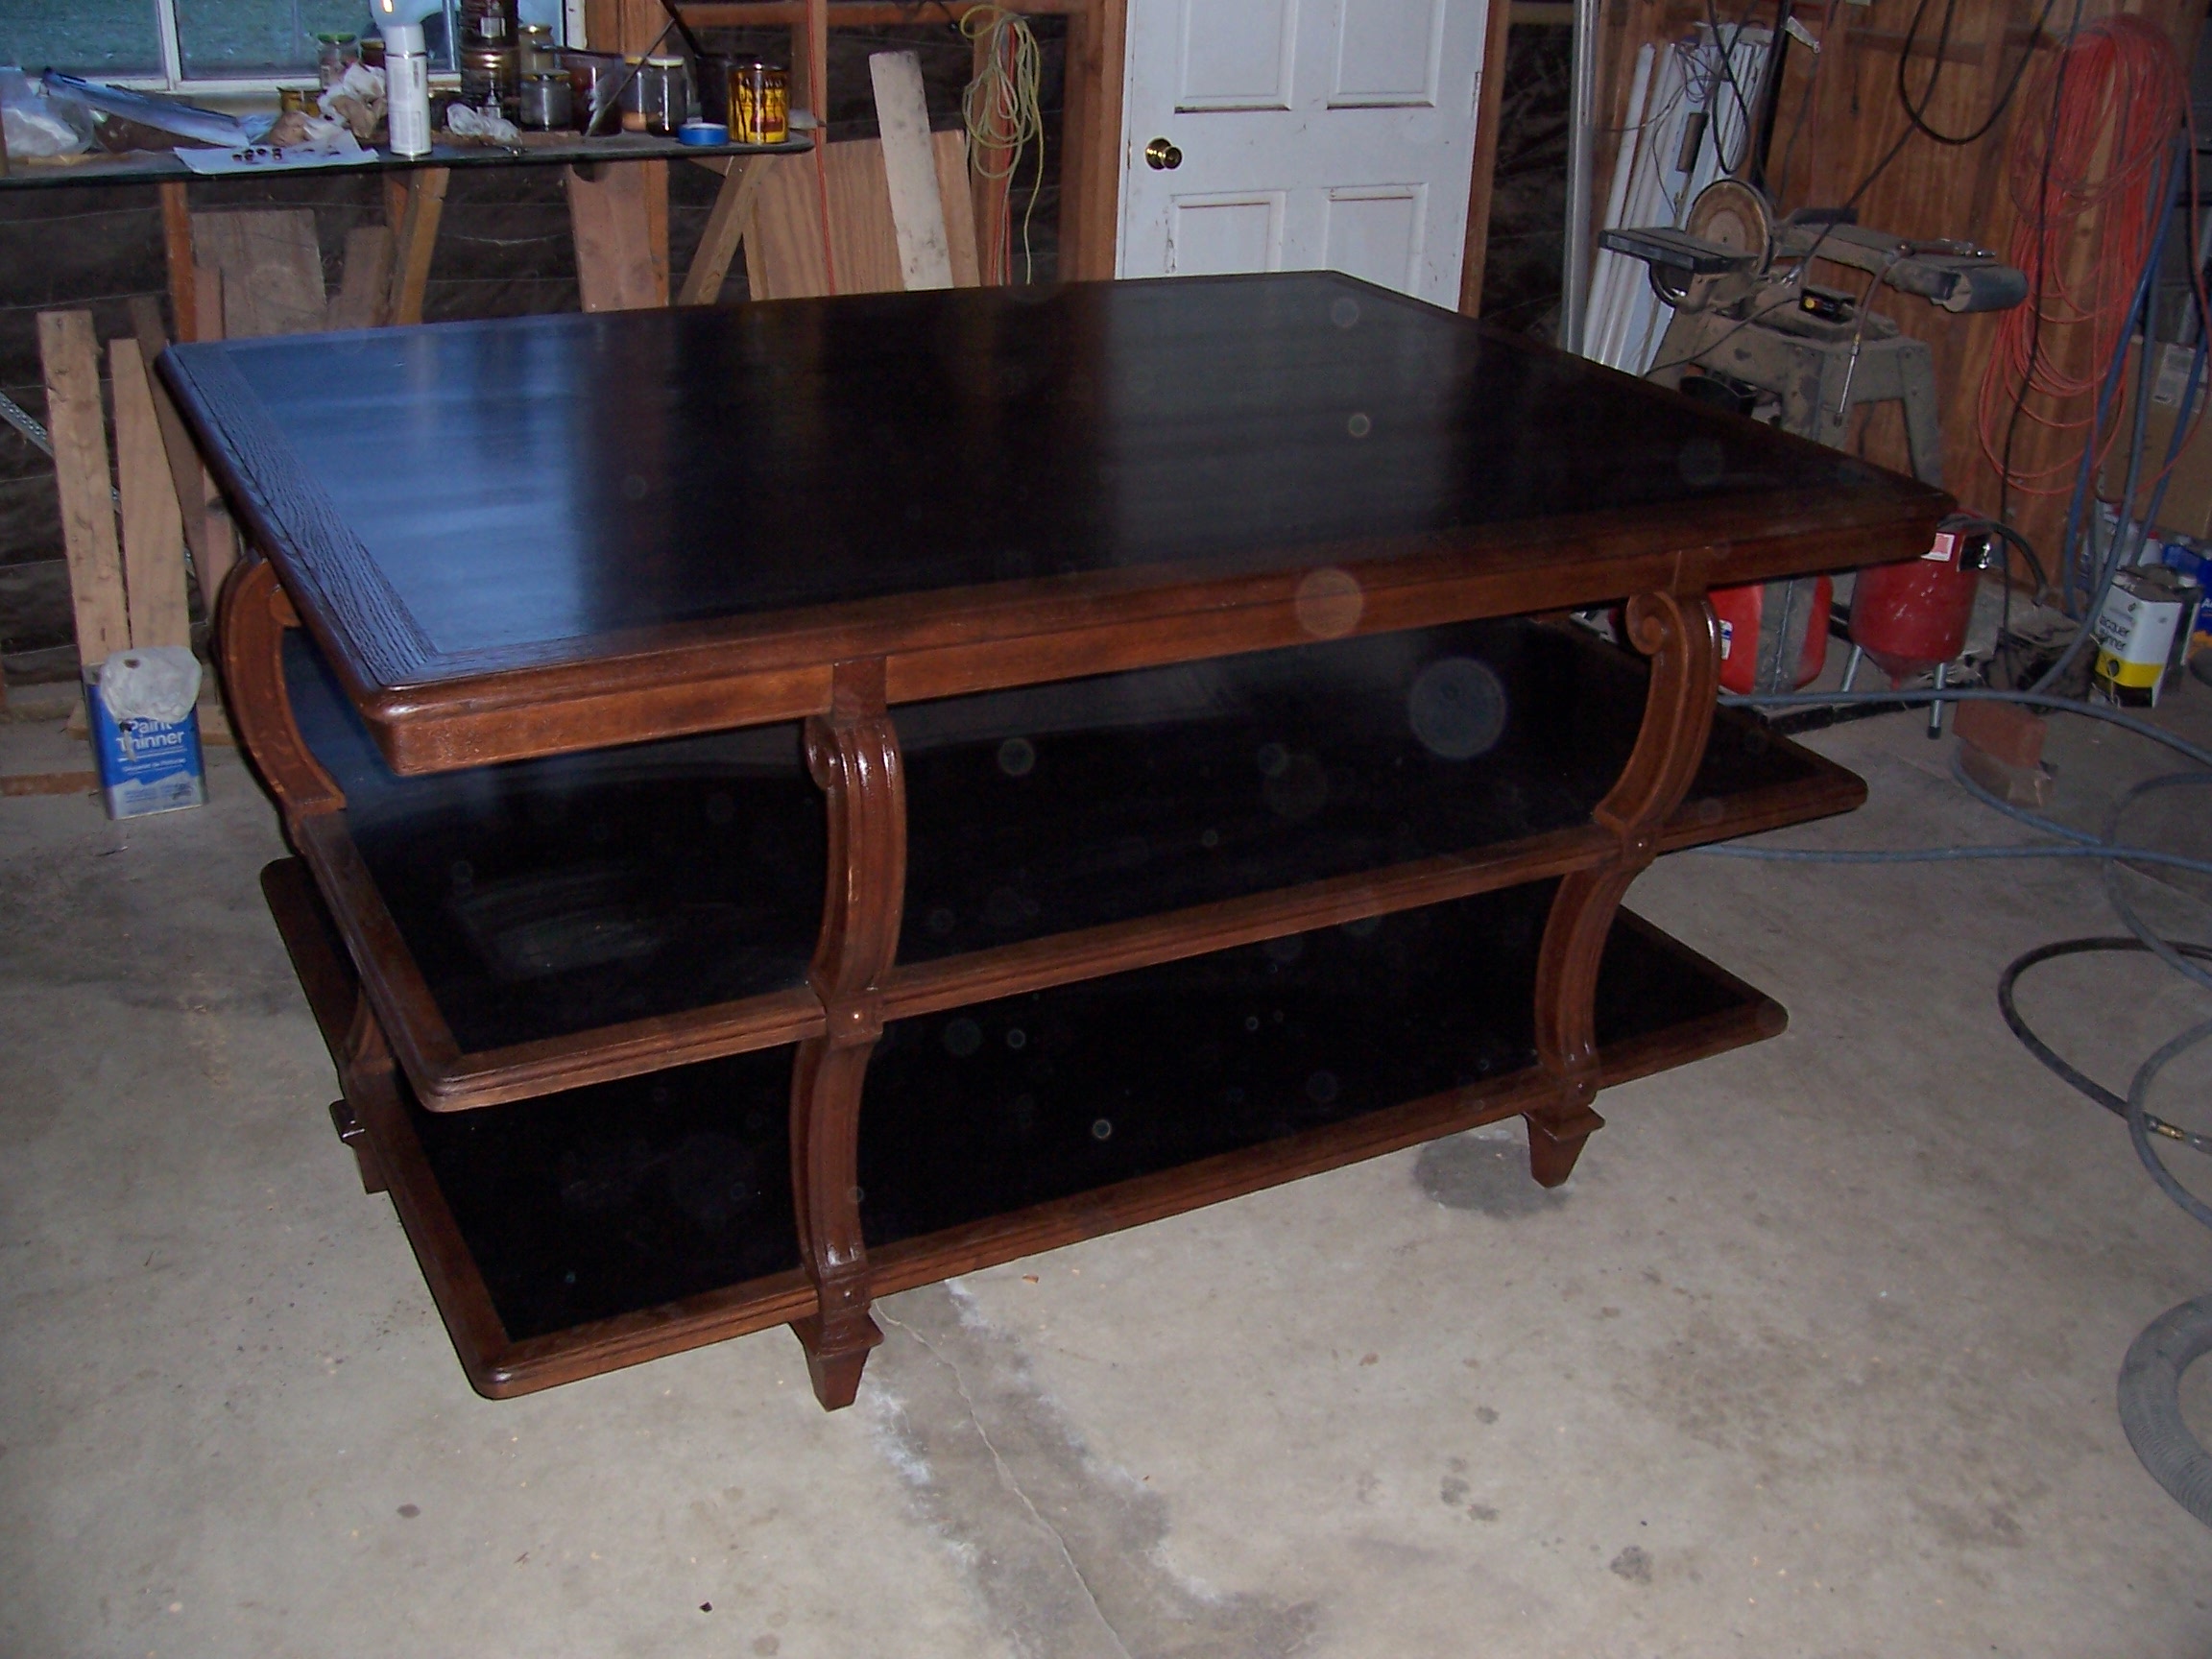 Classic library table becomes sewing table